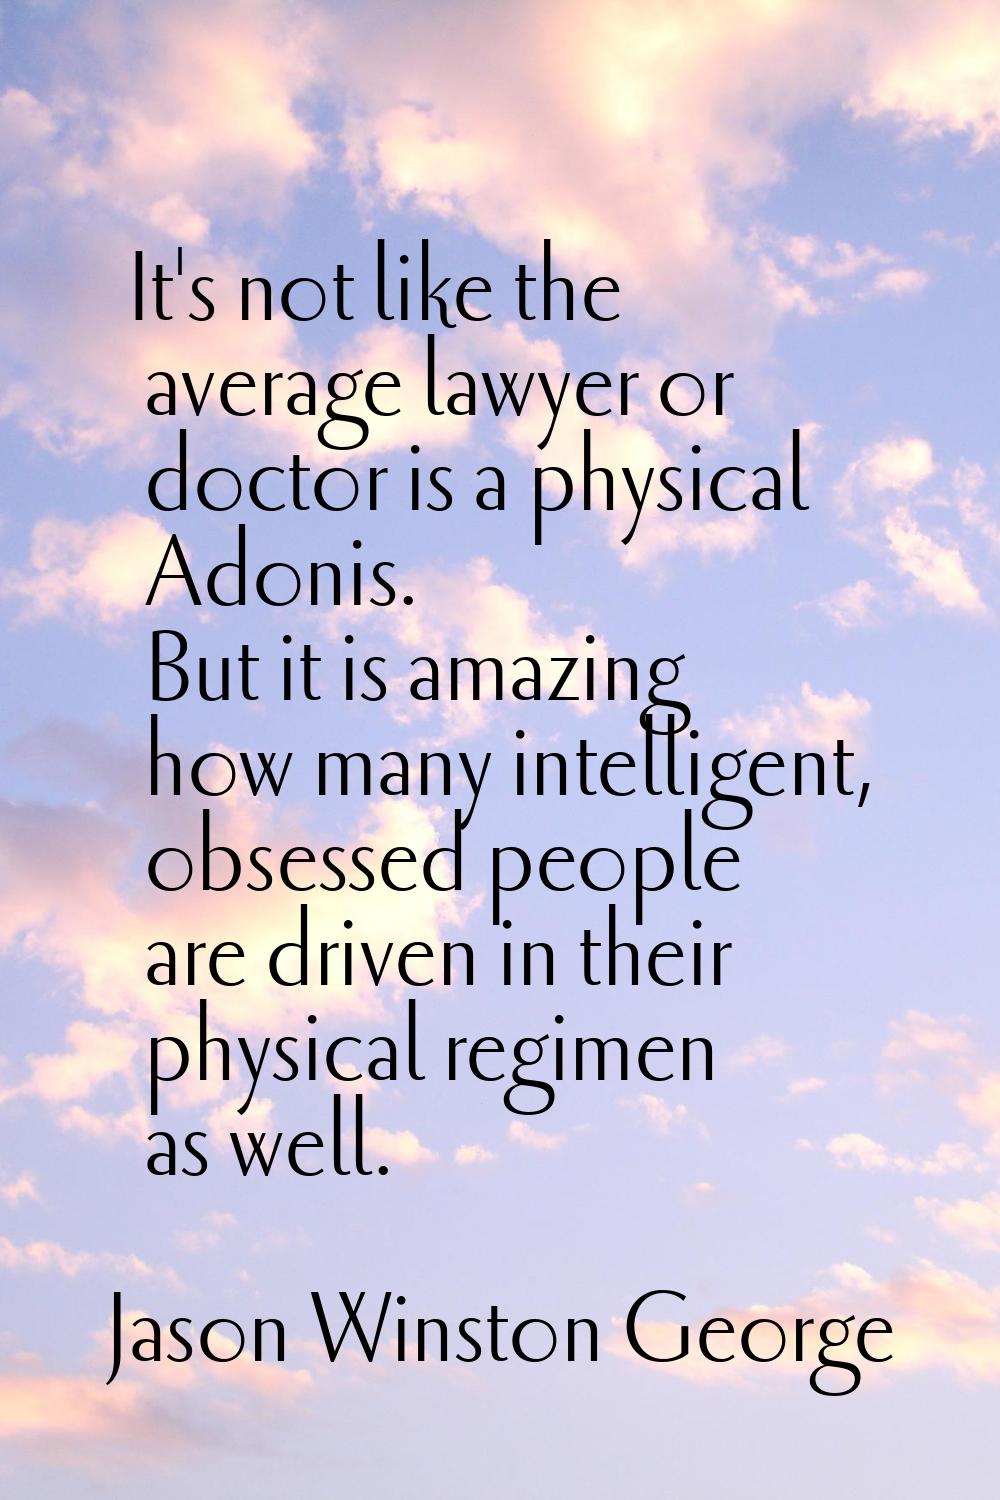 It's not like the average lawyer or doctor is a physical Adonis. But it is amazing how many intelli